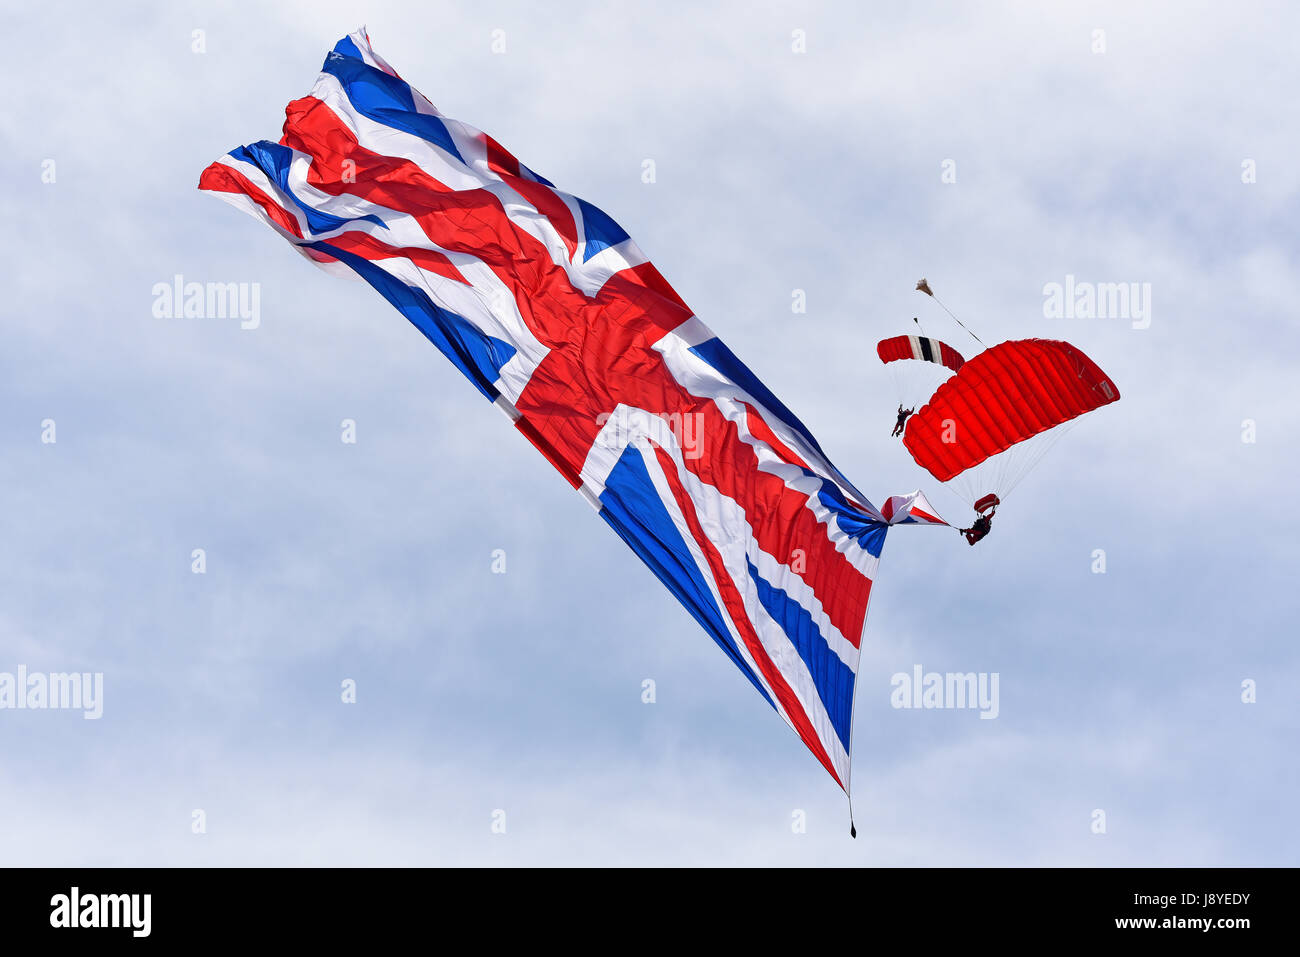 The Red Devils parachute team with the largest flag used by any team, here using the 5000 sq ft union flag Stock Photo